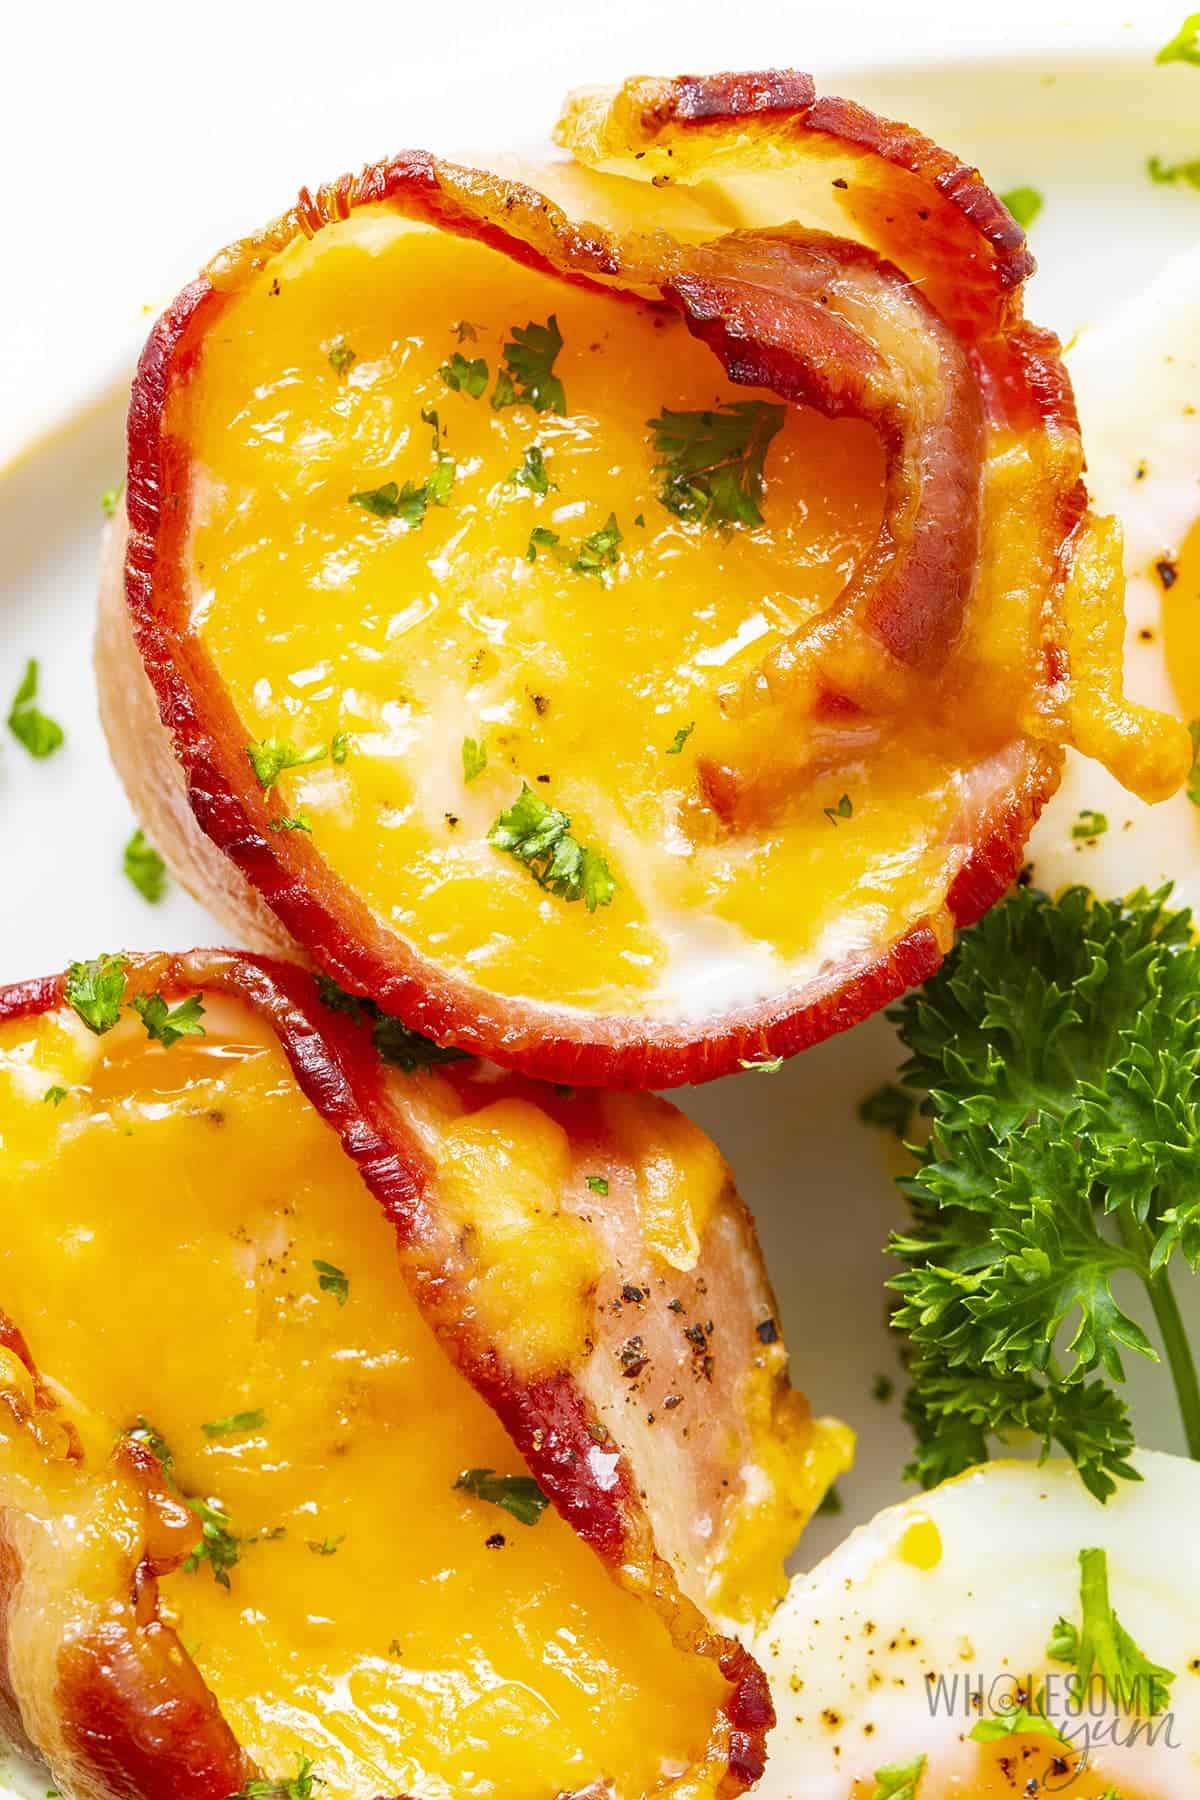 Baked eggs recipe with bacon.